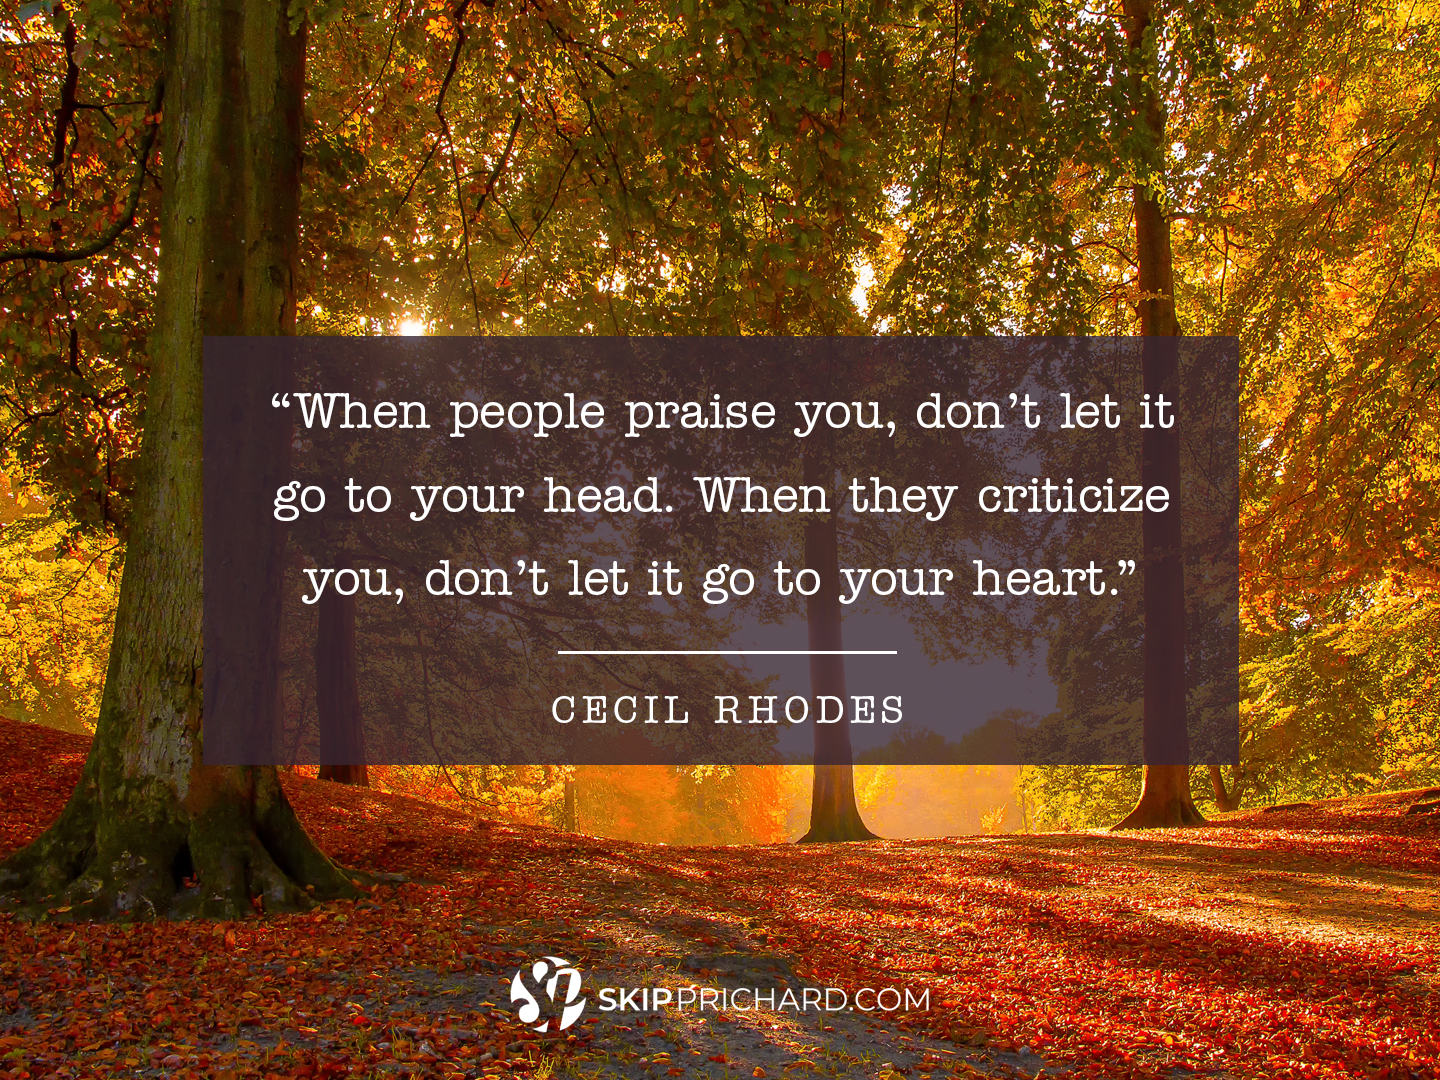 “When people praise you, don’t let it go to your head. When they criticize you, don’t let it go to your heart.”